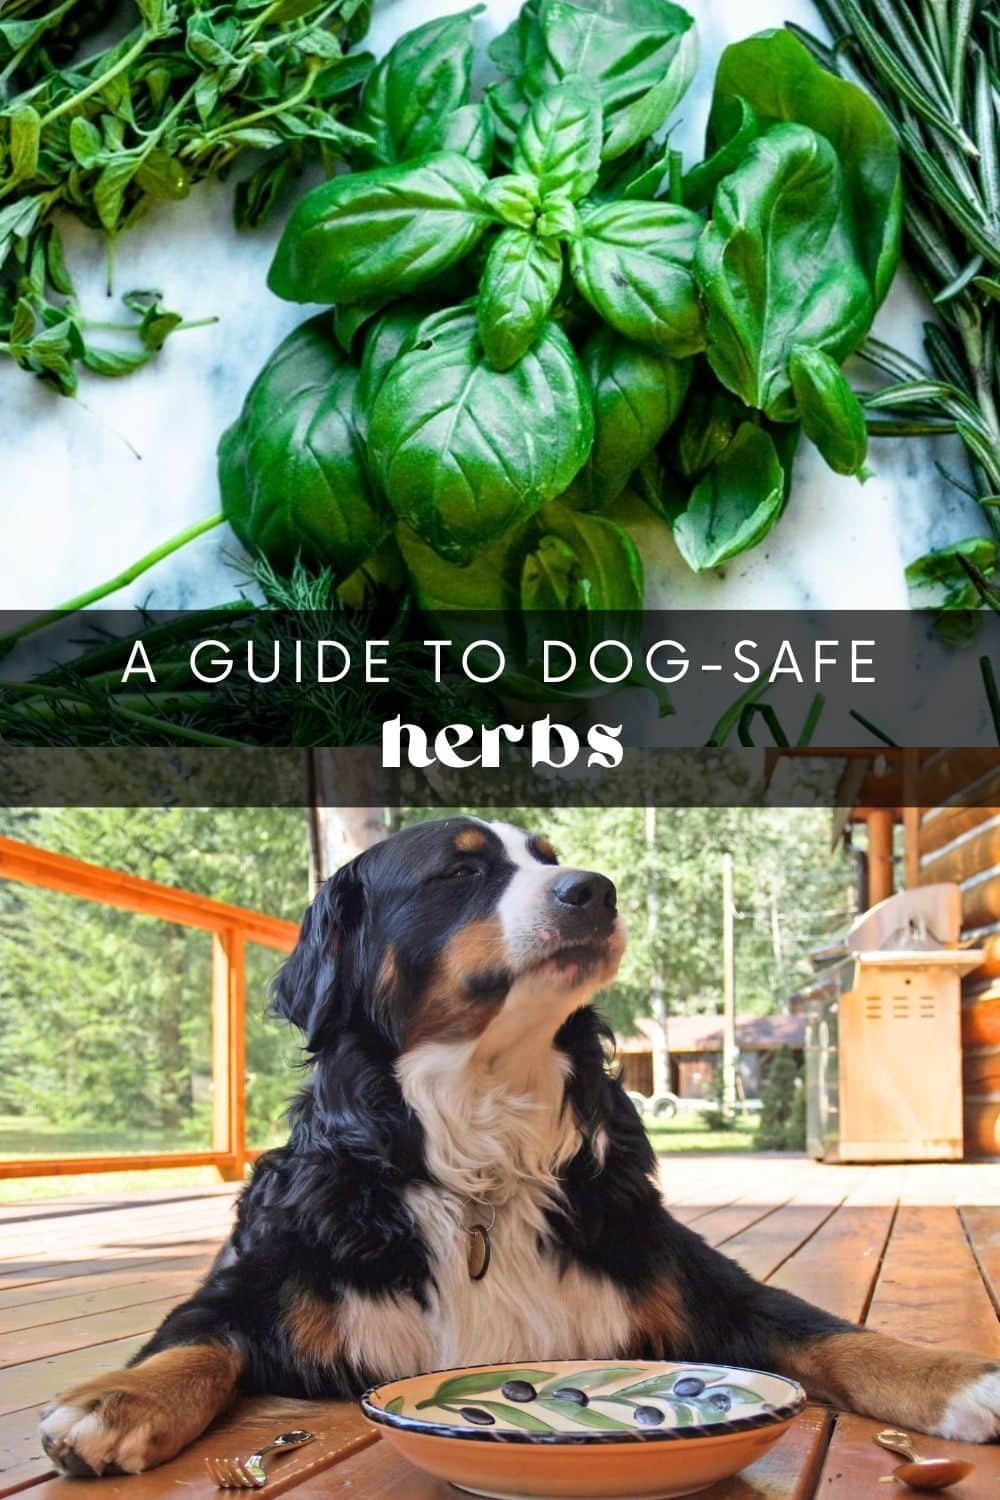 Dogs are not just pets; they're part of the family! And like any family member, we want to ensure they're healthy and cared for. Just as we do with our own bodies, it's important to pay attention to what our dogs ingest. Many plants and foods are unsafe for dogs and can cause serious health issues.